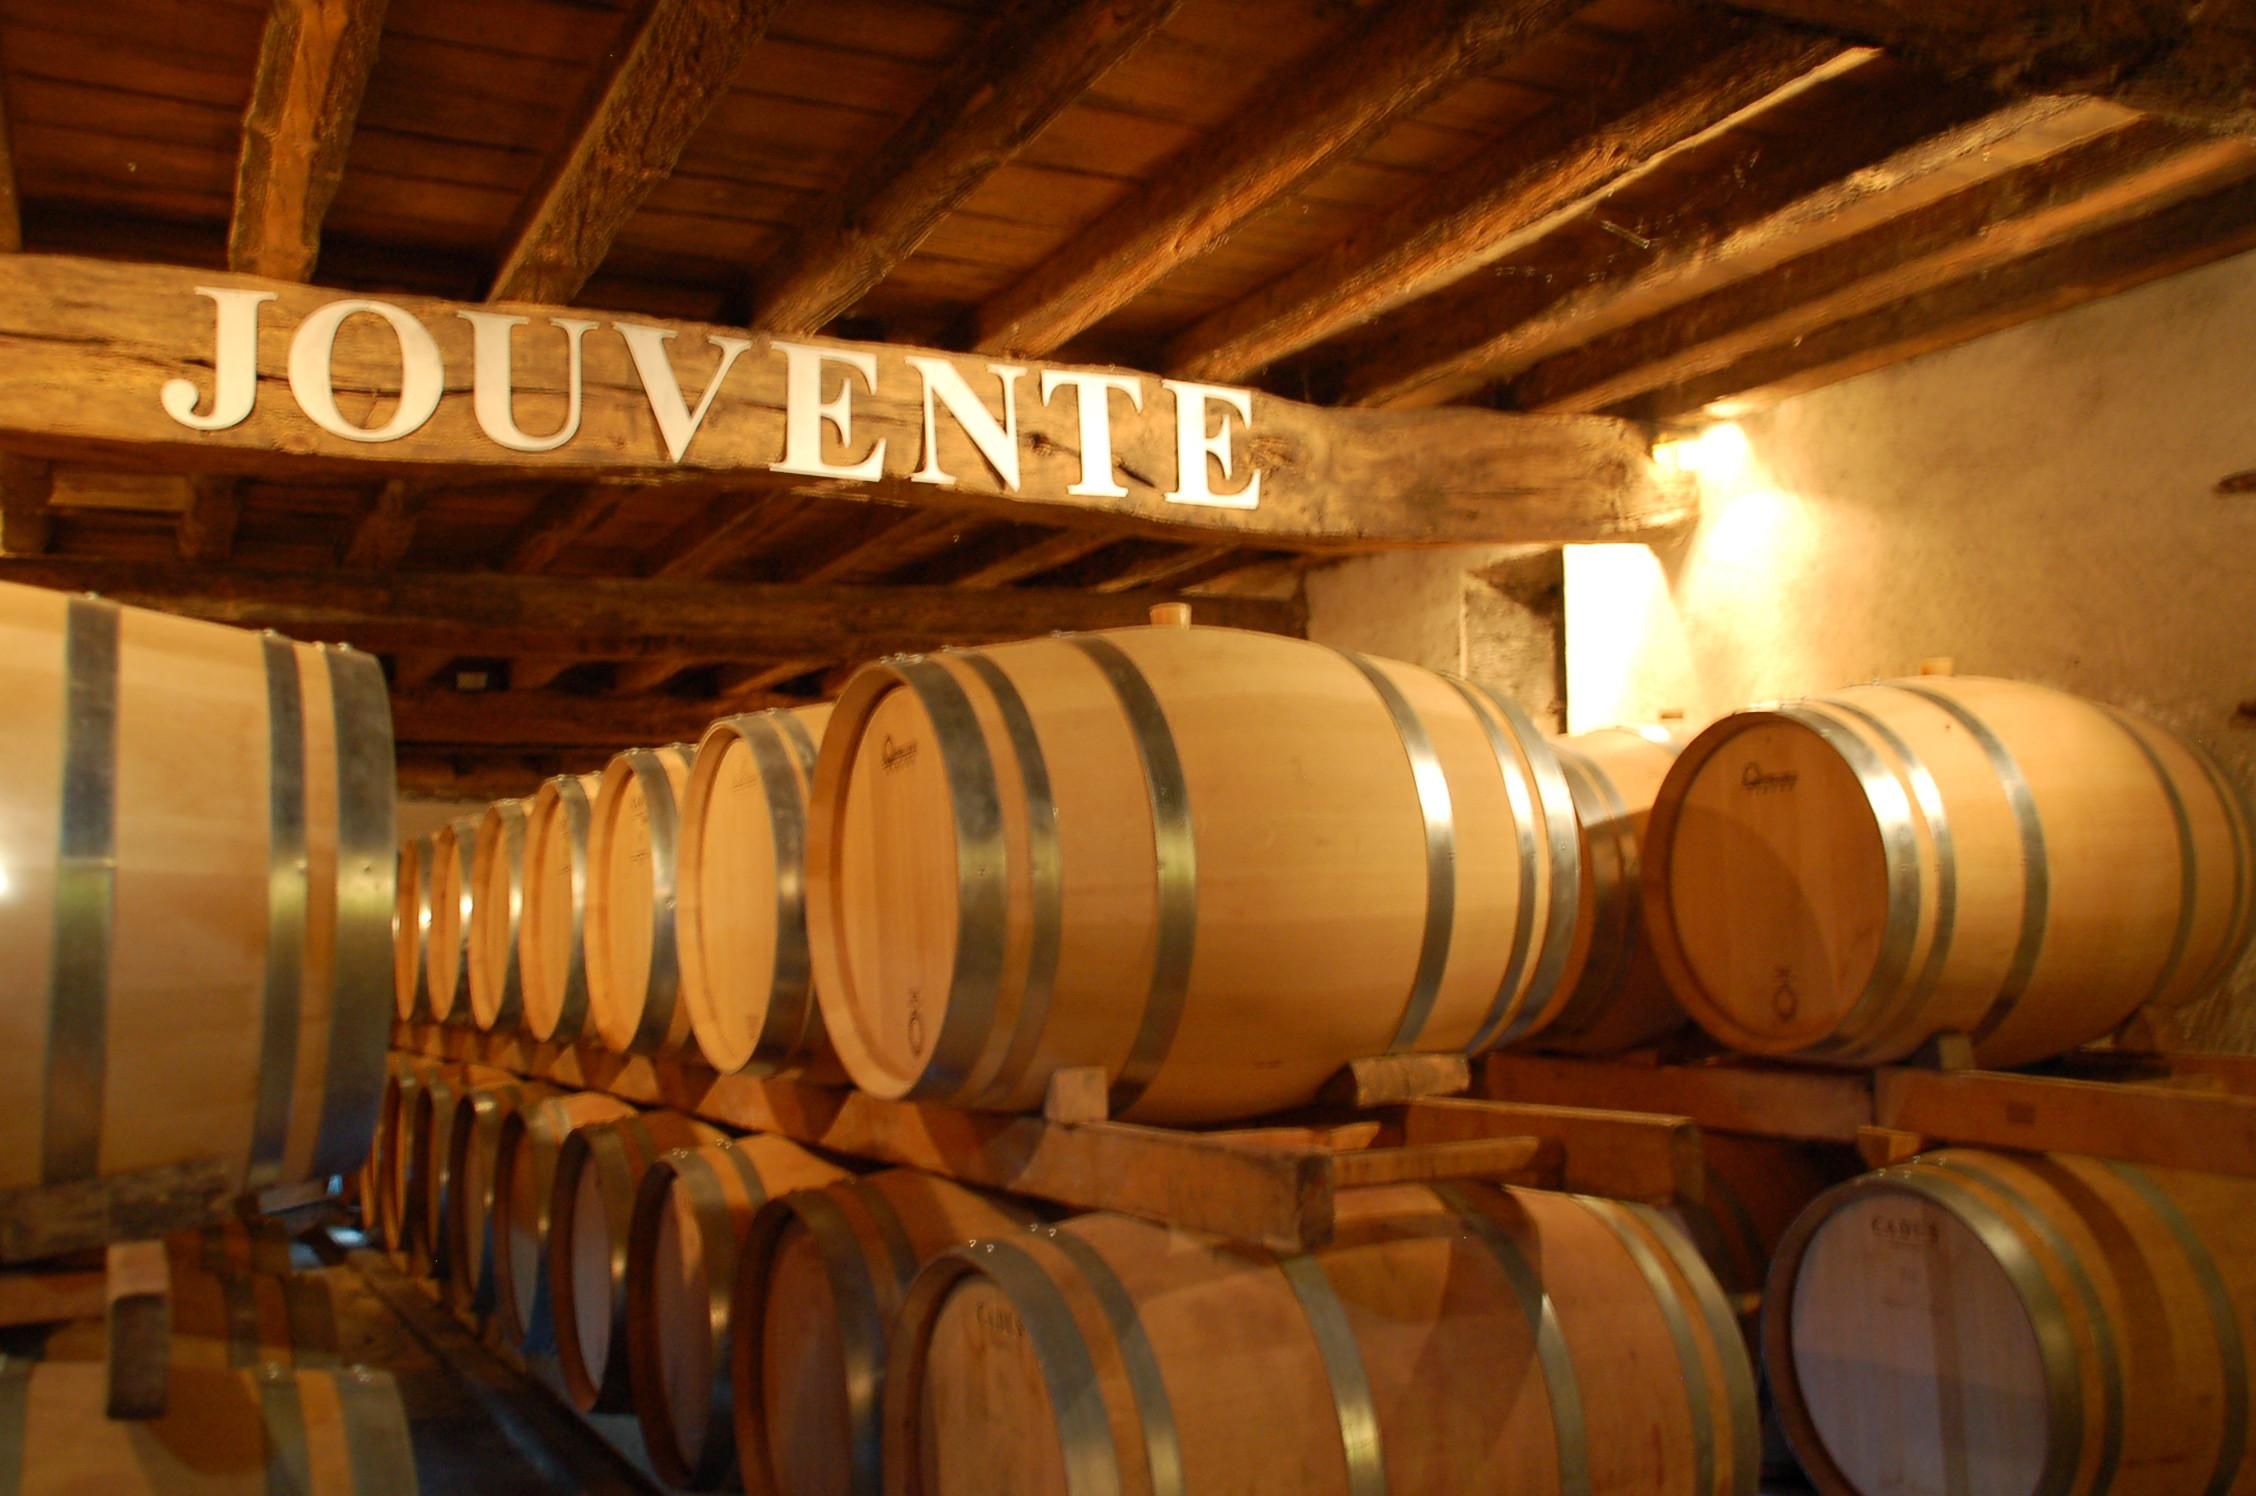 In the cellar of the Château Jouvente